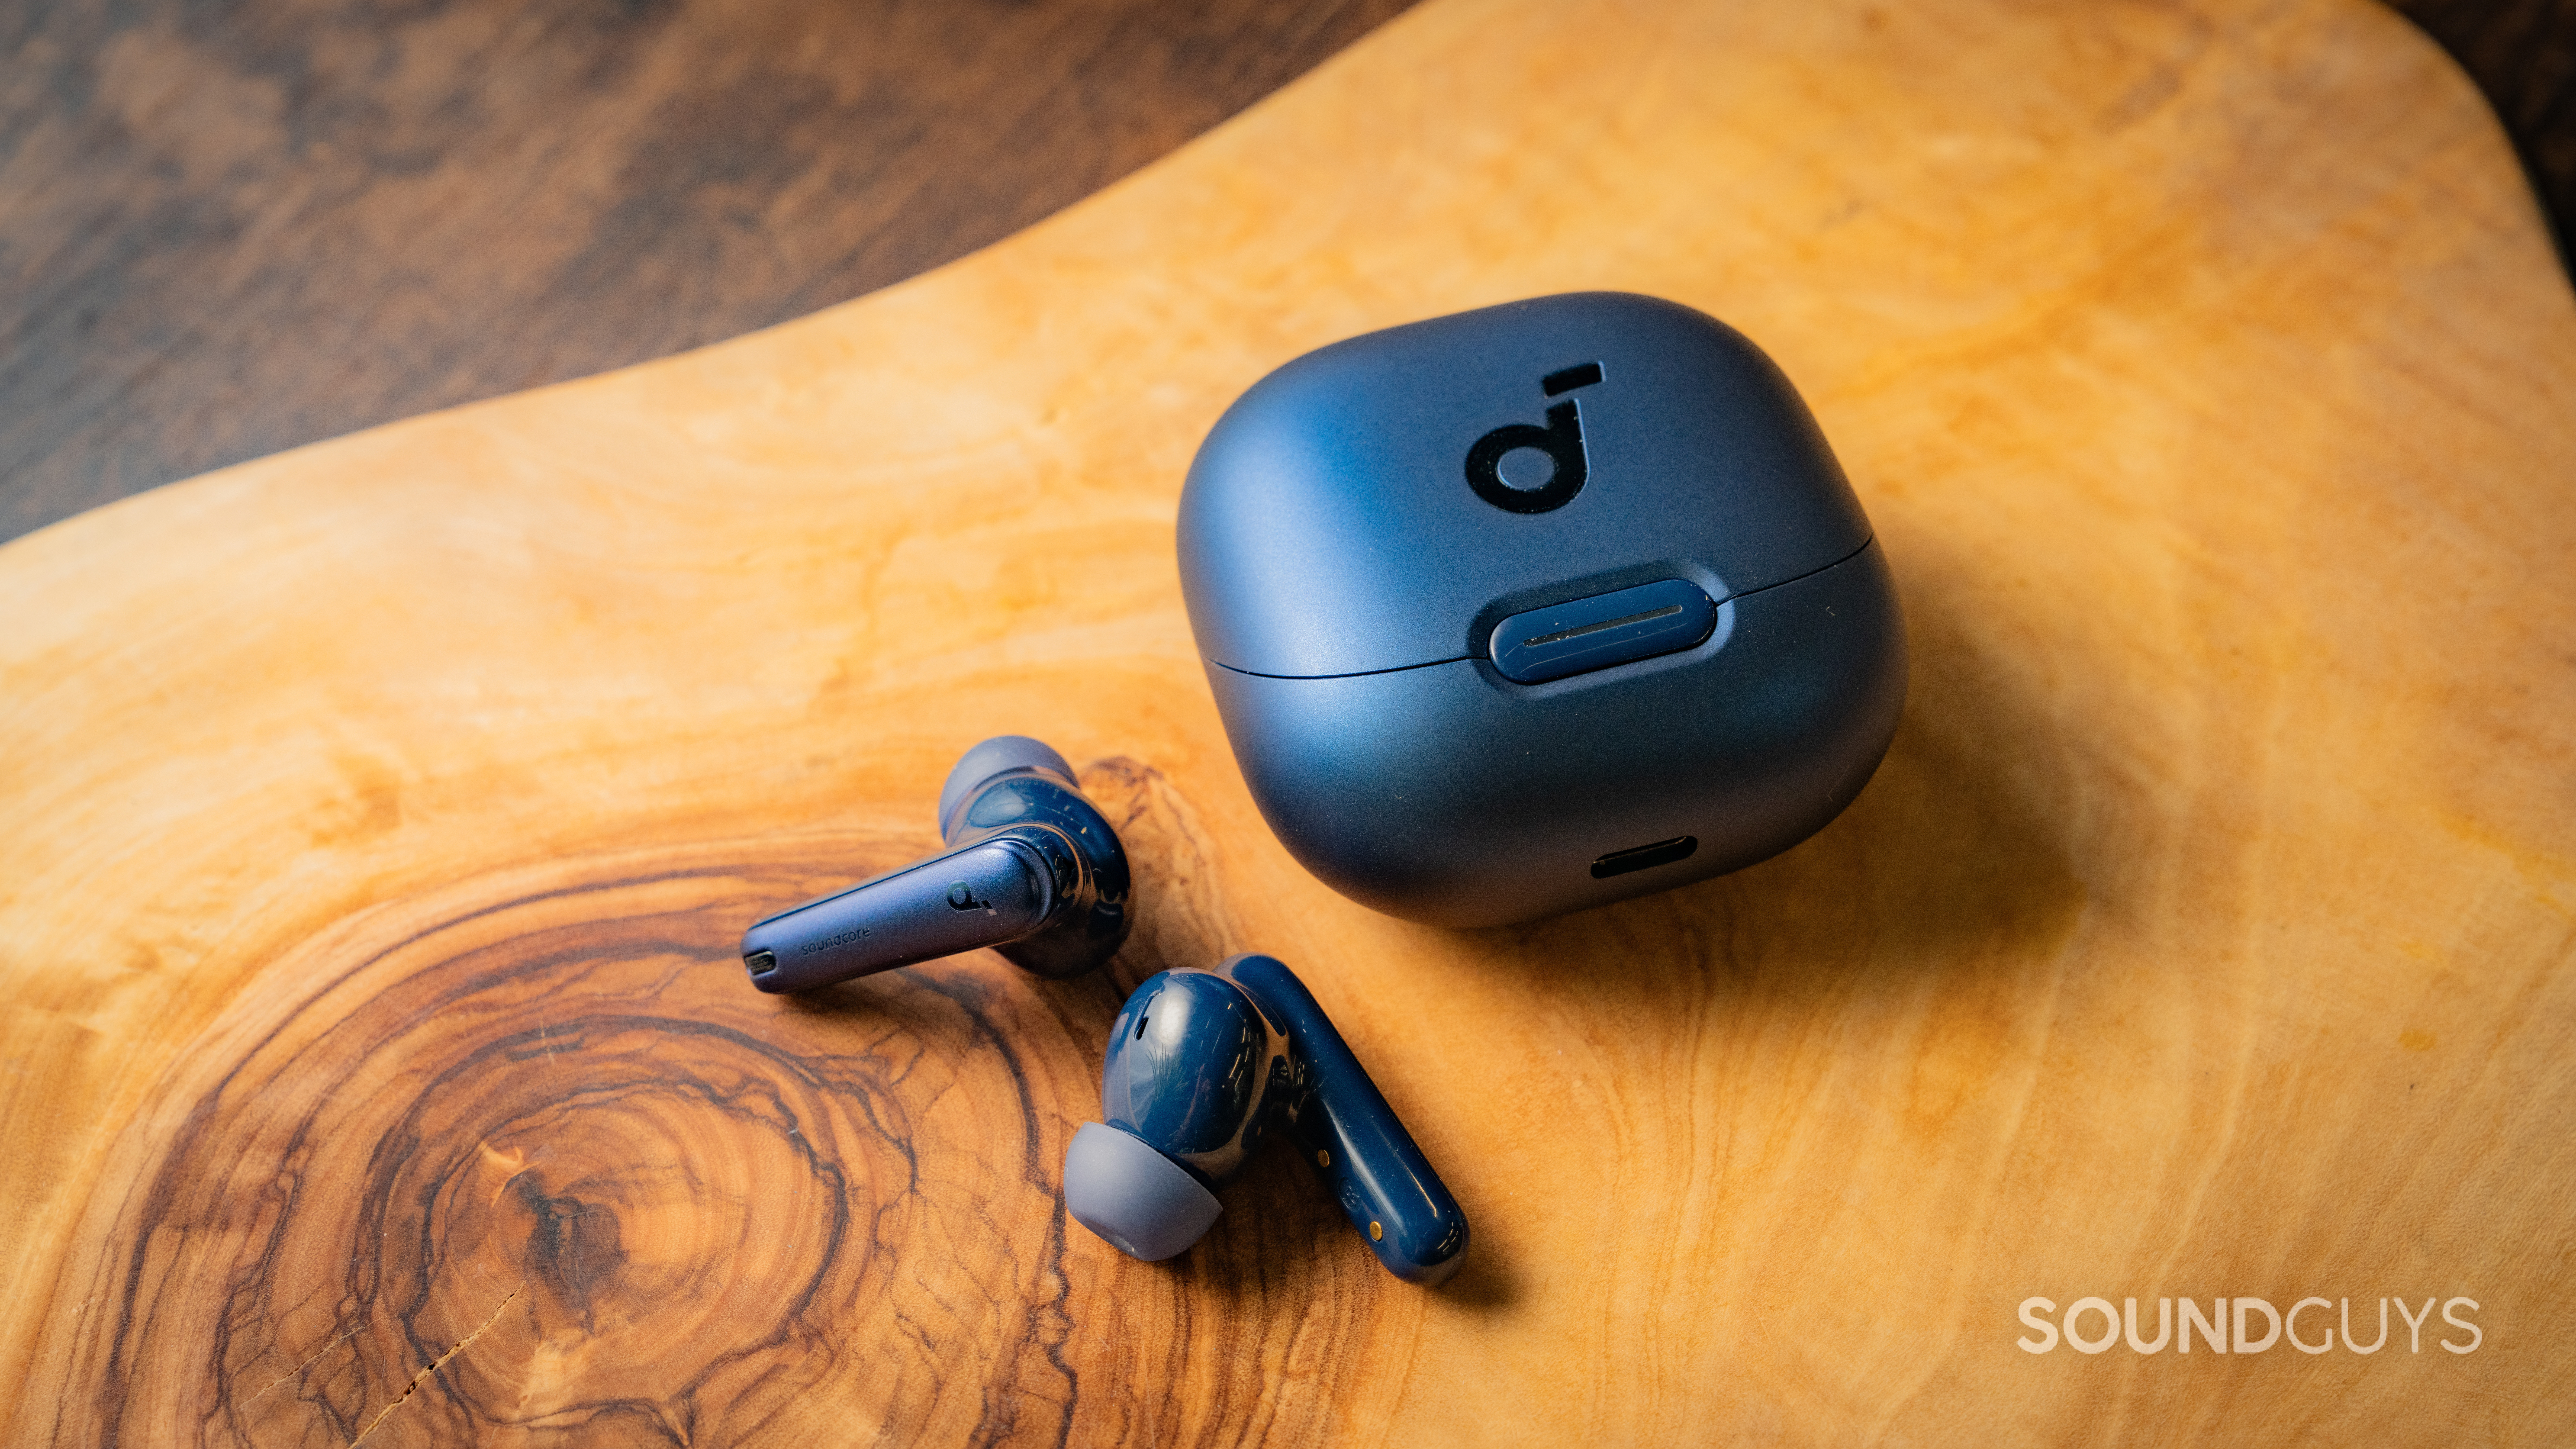 The 3 Best Earbuds Under $50 of 2023